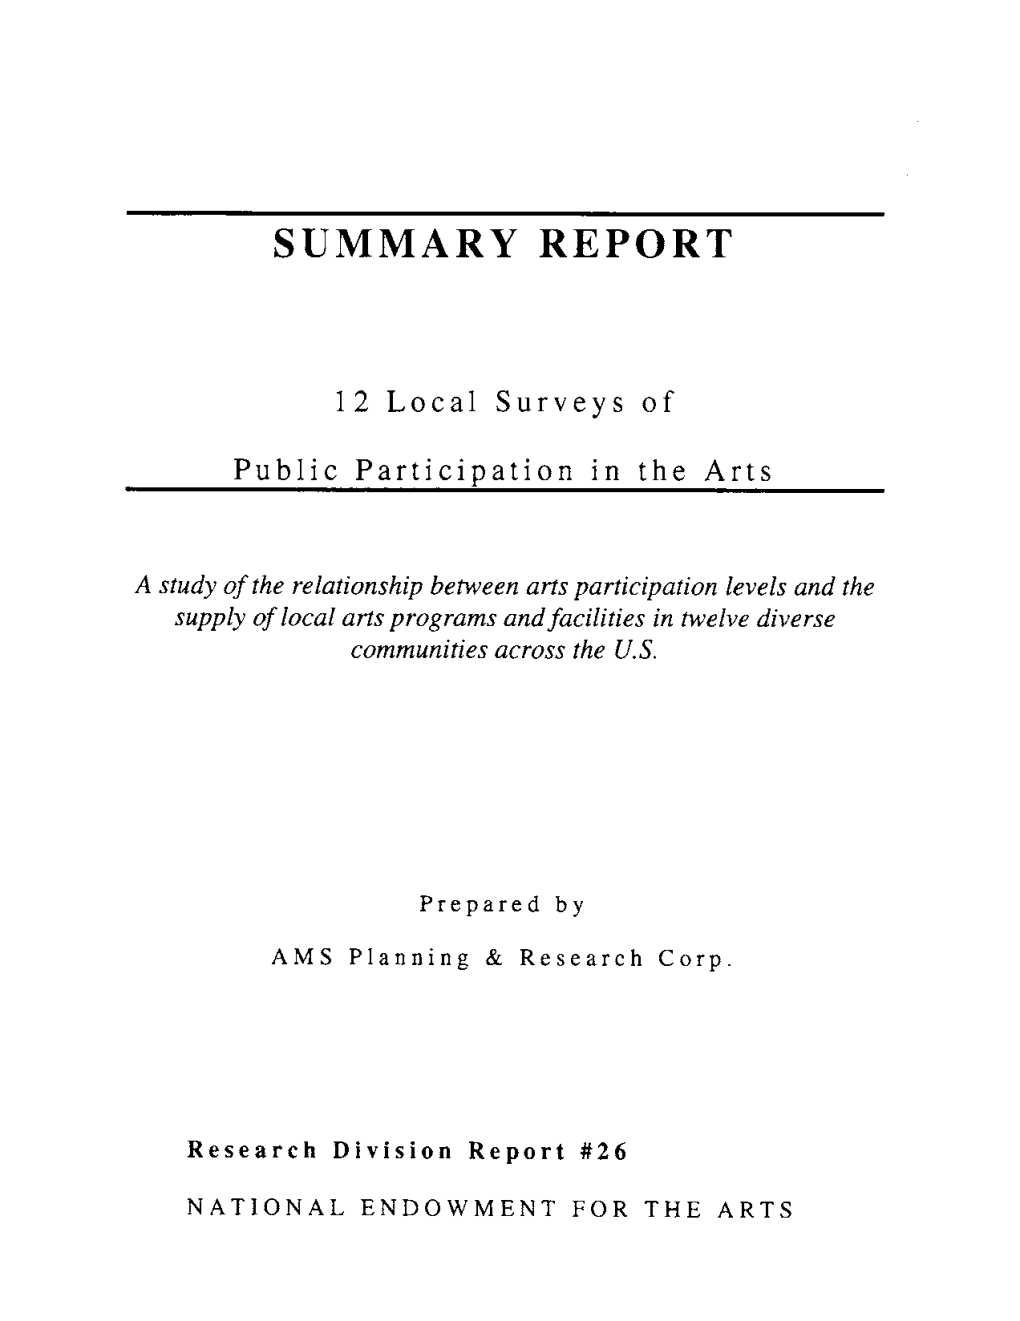 National Endowment for the Arts Research Division Report # 26